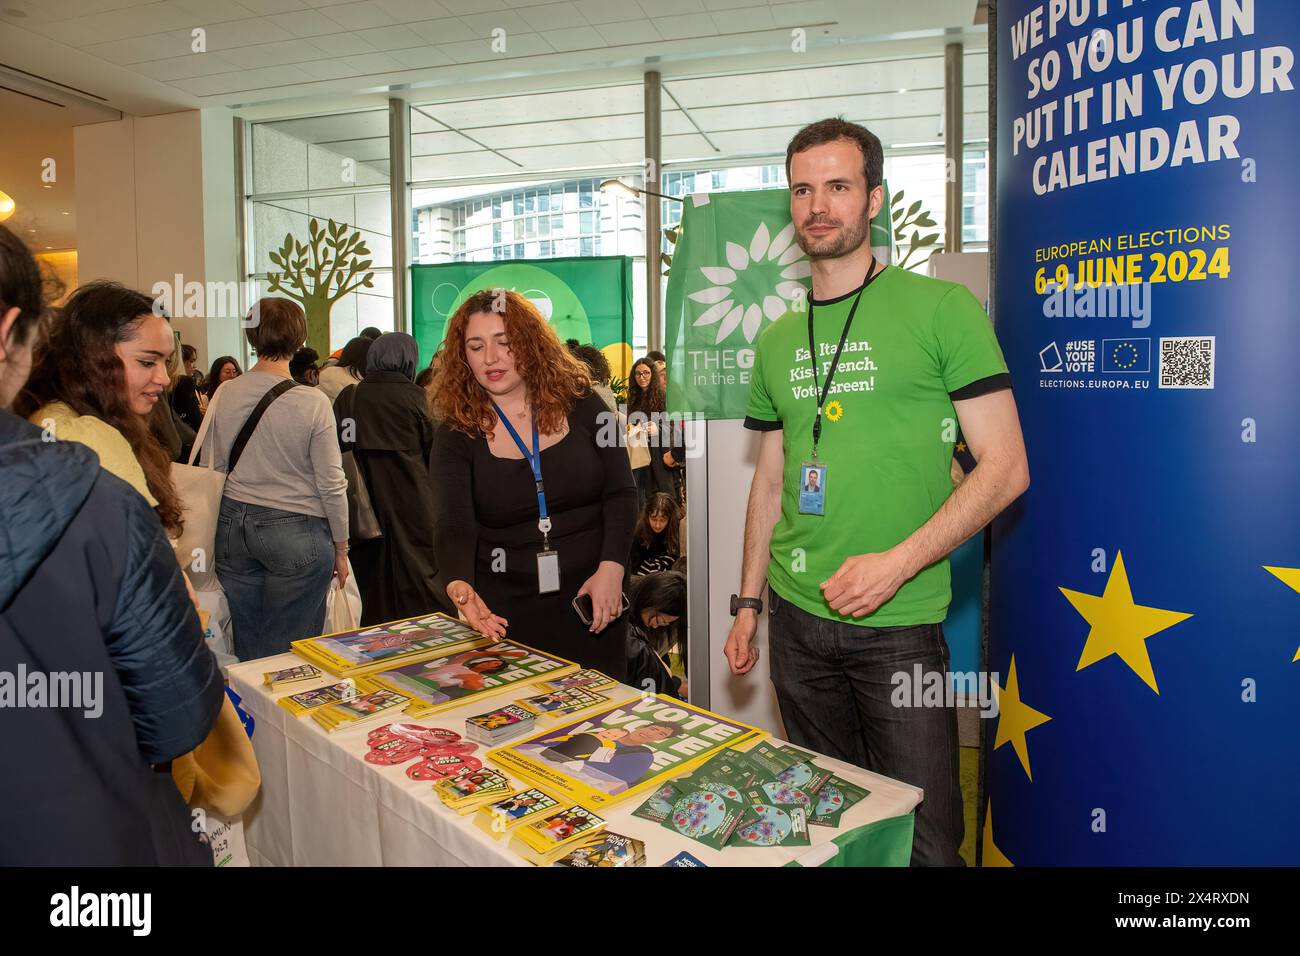 Party workers for the European Greens hand out stickers and information during an open day to celebrate the birthday of the European Parliament in Brussels. Celebrating the European Parliament's birthday in Brussels, visitors gained special access to the Parliament chambers and the iconic building itself. The open day featured informative stands on the upcoming European Parliament elections, fostering political engagement and dialogue. Against the backdrop of European democracy, attendees immersed themselves in the legislative process, symbolizing transparency and civic participation. The eve Stock Photo